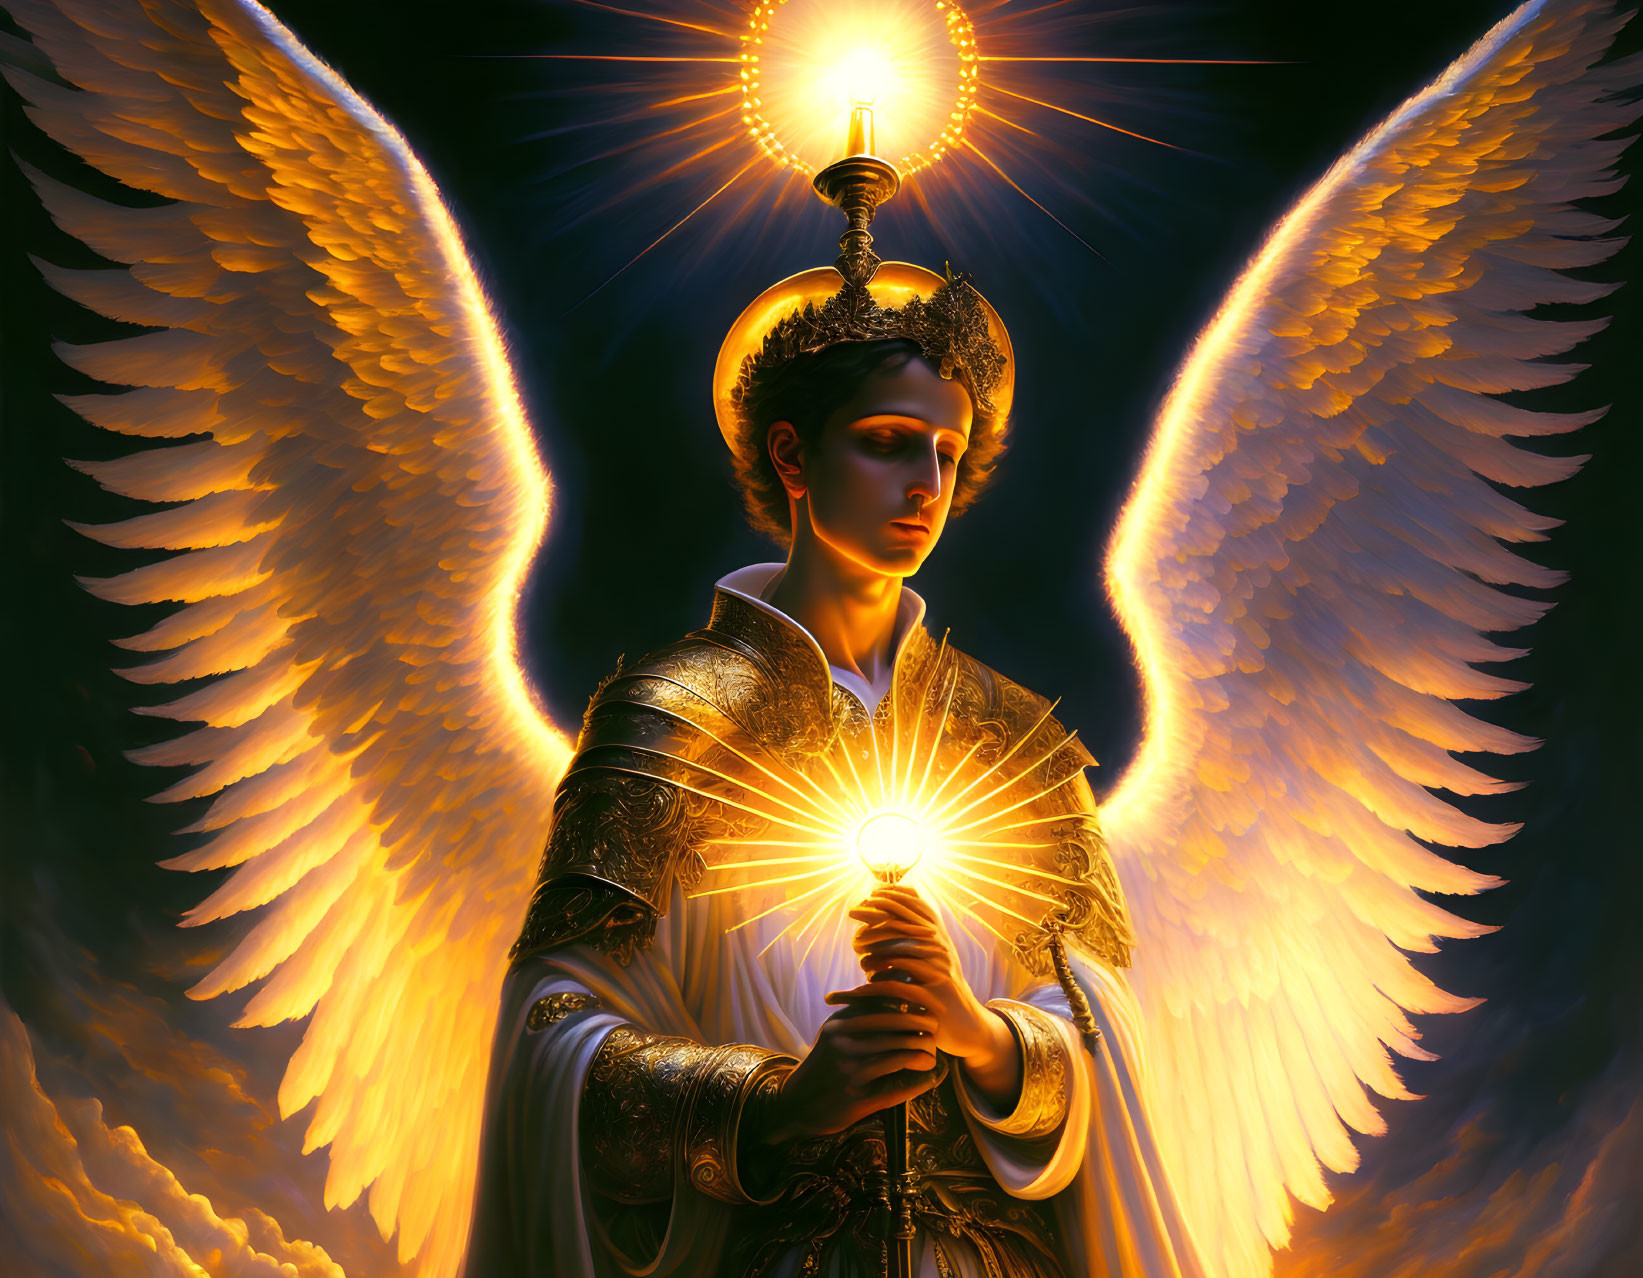 Golden armored angel with luminous wings holding glowing orb in radiant halo.